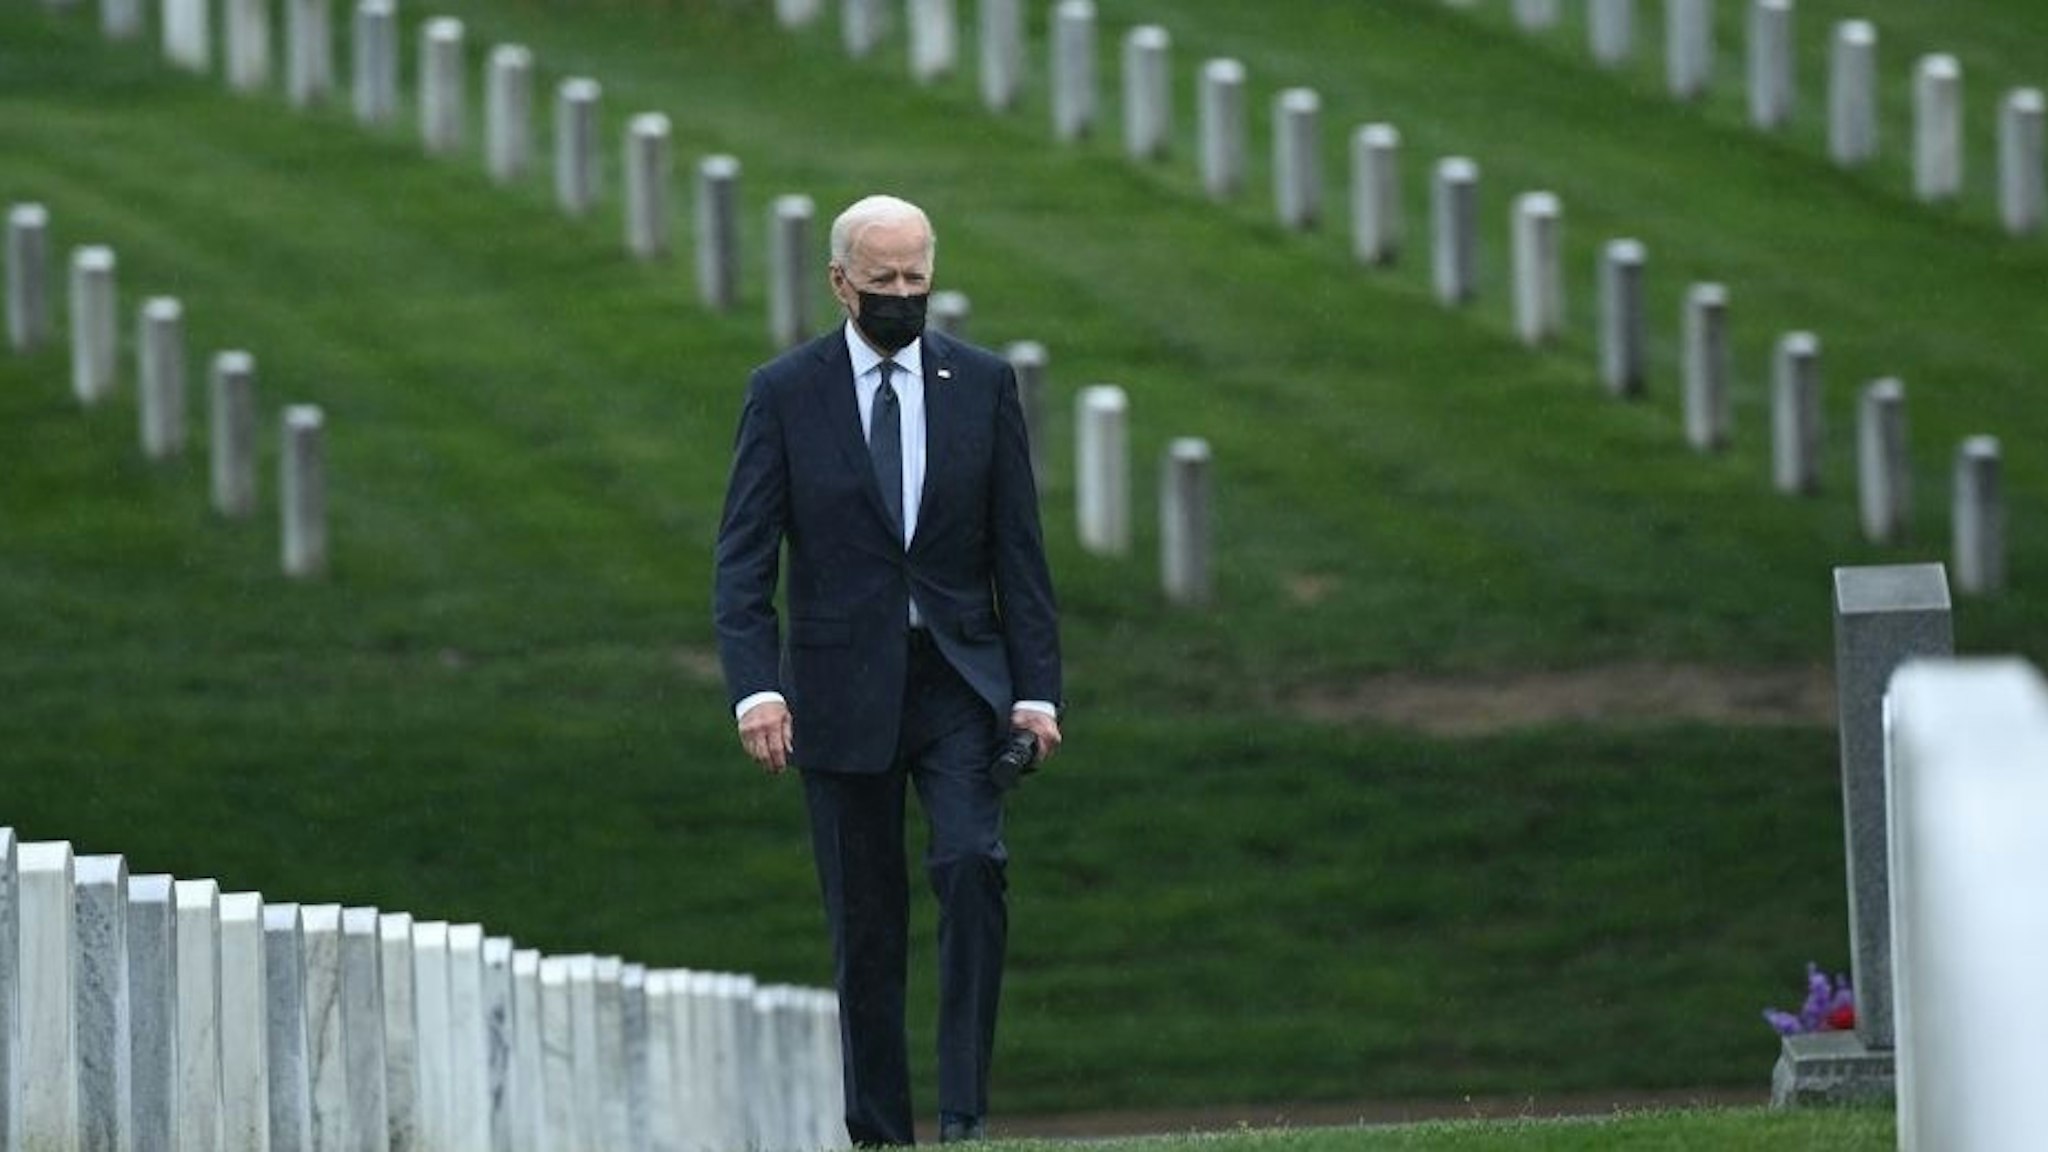 US President Joe Biden walks through Arlington National cemetary to honor fallen veterans of Afghan conflict in Arlington, Virginia on April 14, 2021. - President Joe Biden announced it's "time to end" America's longest war with the unconditional withdrawal of troops from Afghanistan, where they have spent two decades in a bloody, largely fruitless battle against the Taliban. (Photo by Brendan SMIALOWSKI / AFP) (Photo by